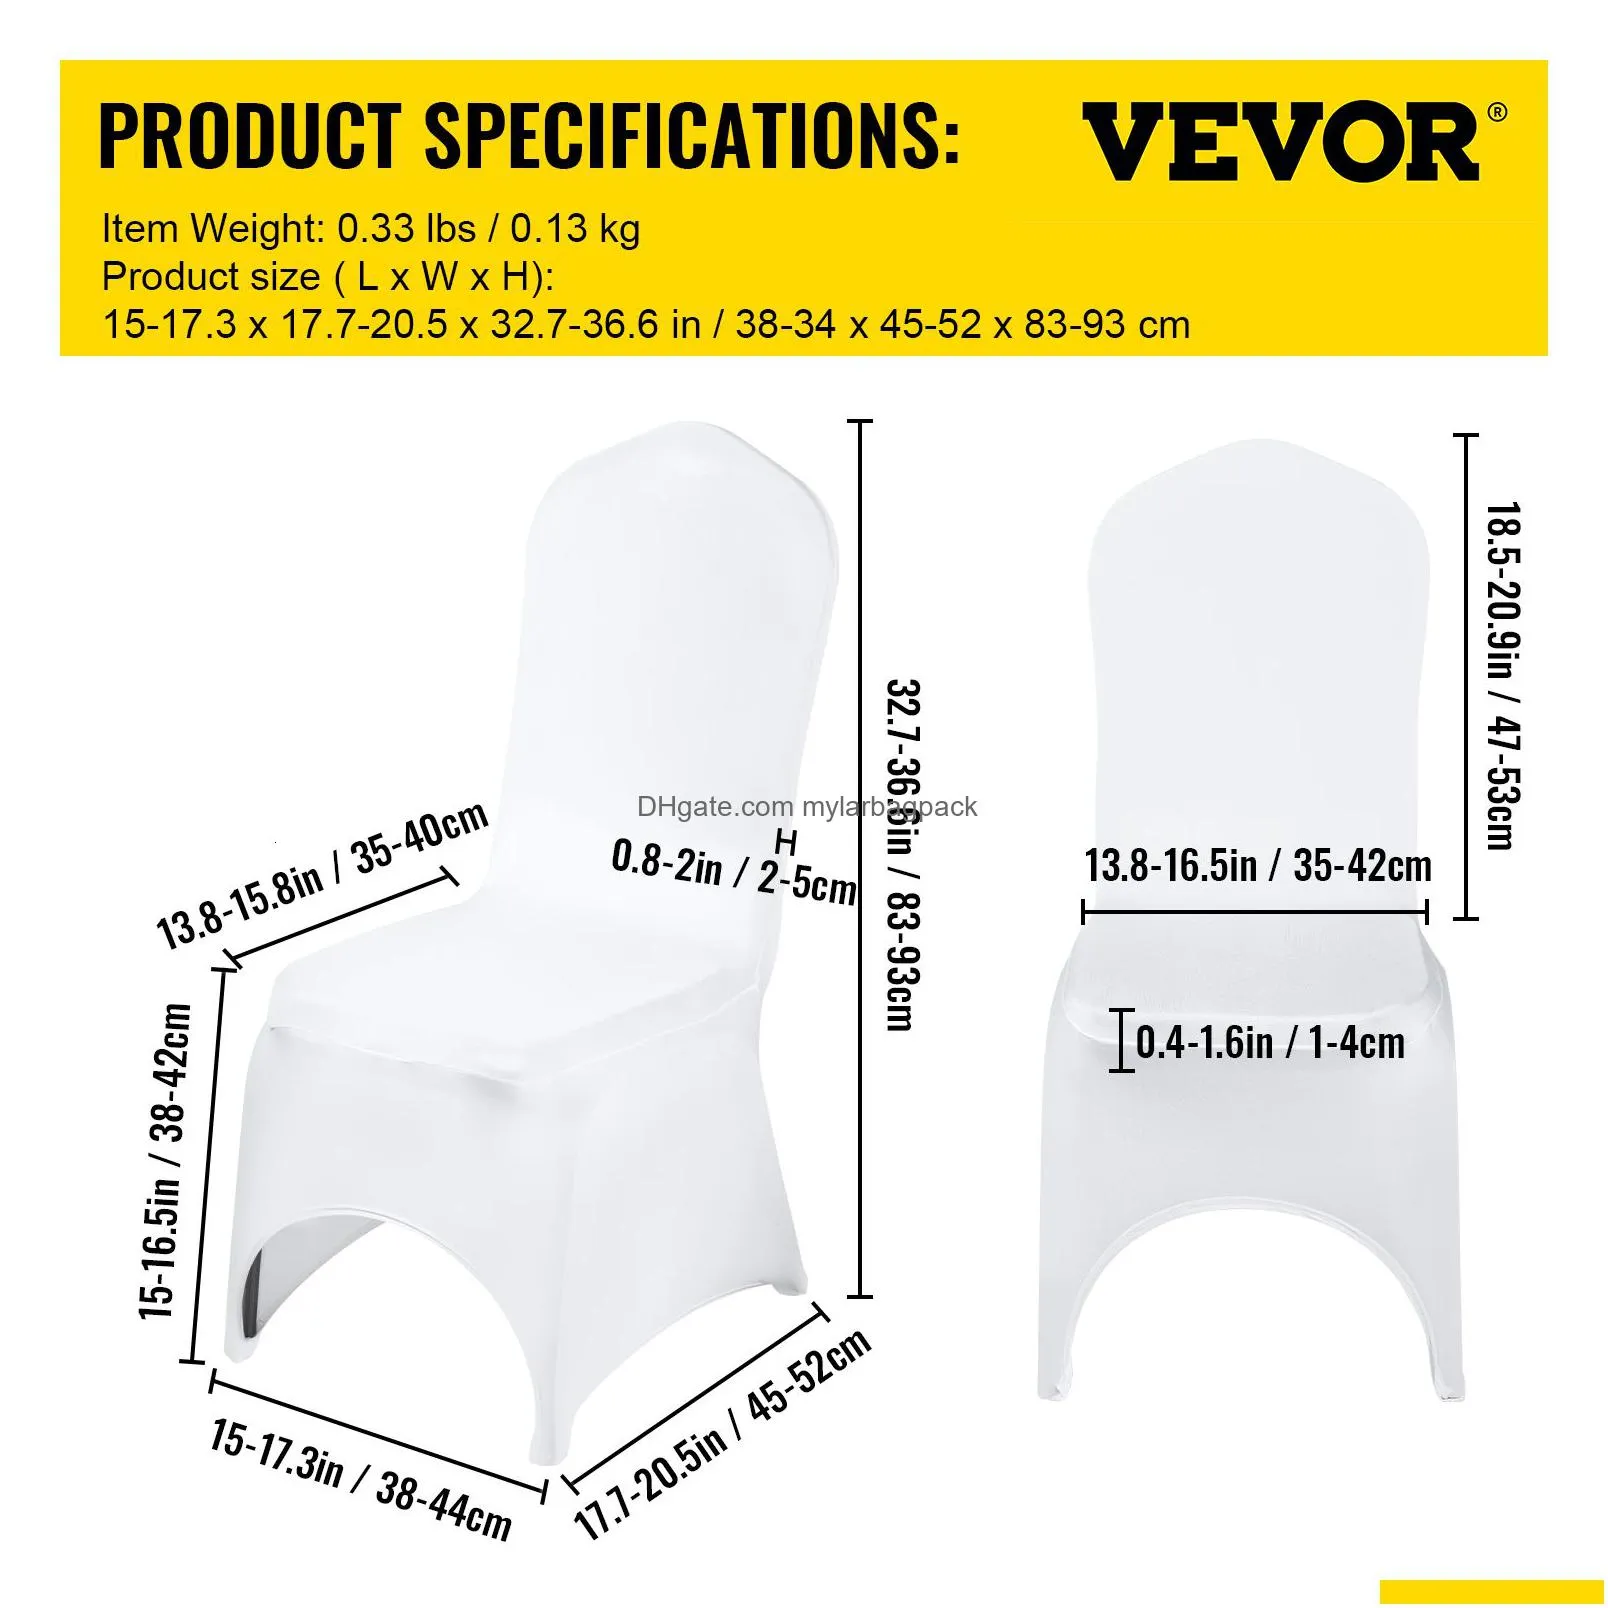 chair covers vevor 50 100pcs wedding chair covers spandex stretch slipcover for restaurant banquet el dining party universal chair cover